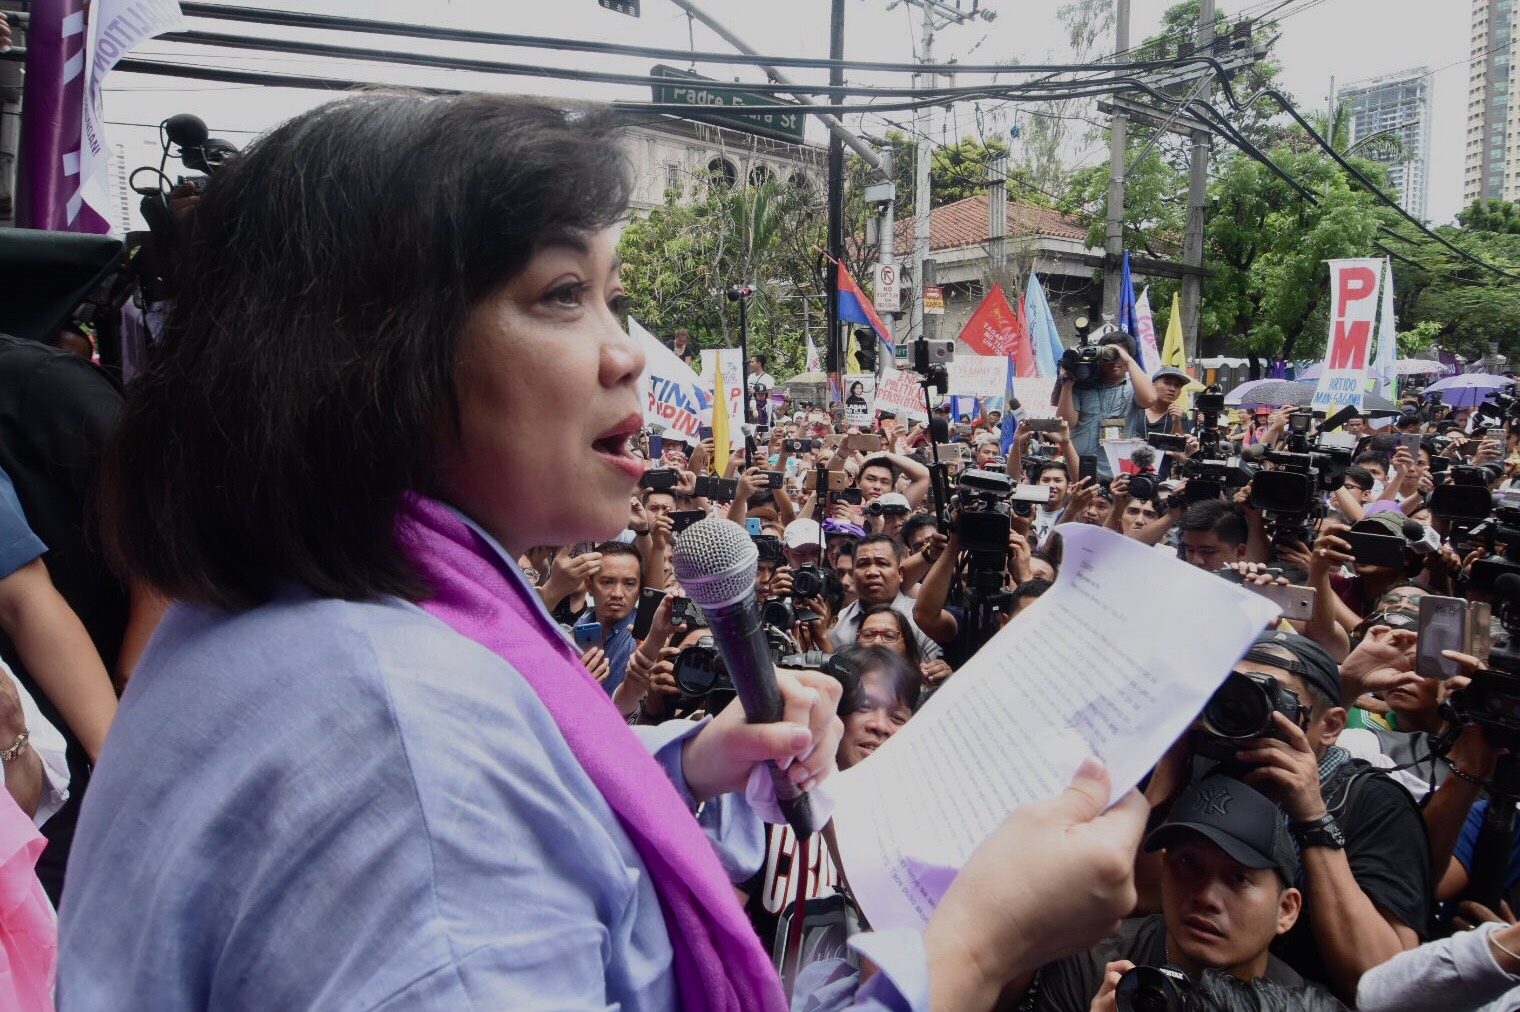 IBP to appeal Sereno ouster; lawyers called to rise up